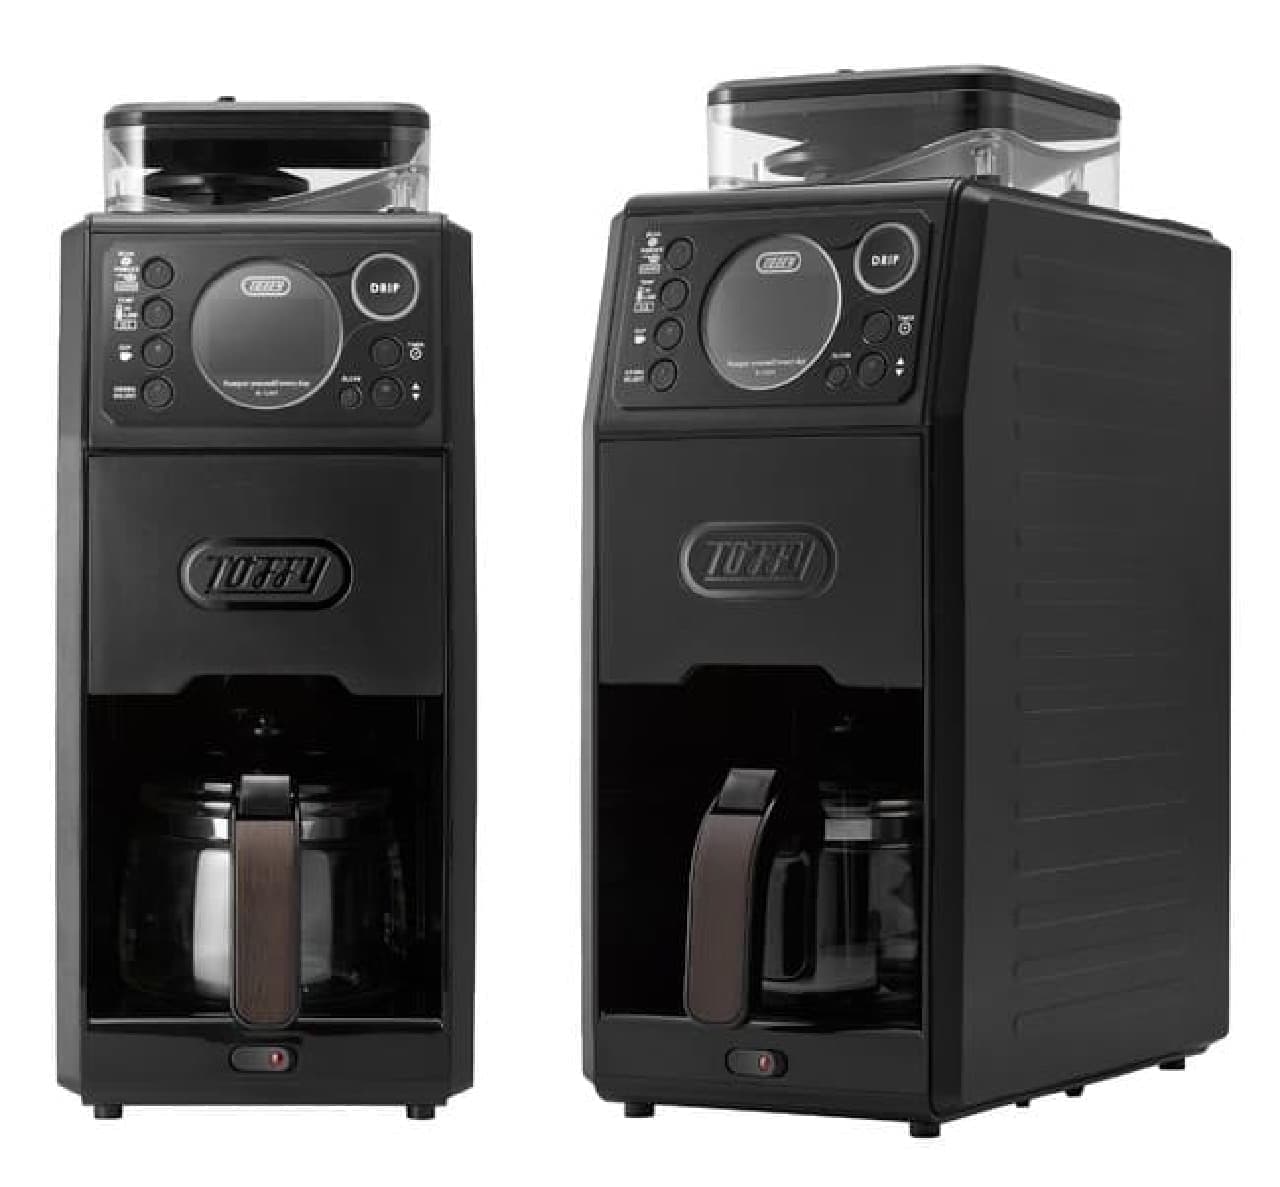 Released "Toffy Custom Drip Coffee Maker with Fully Automatic Mill" --Easy and authentic coffee! Easy to clean